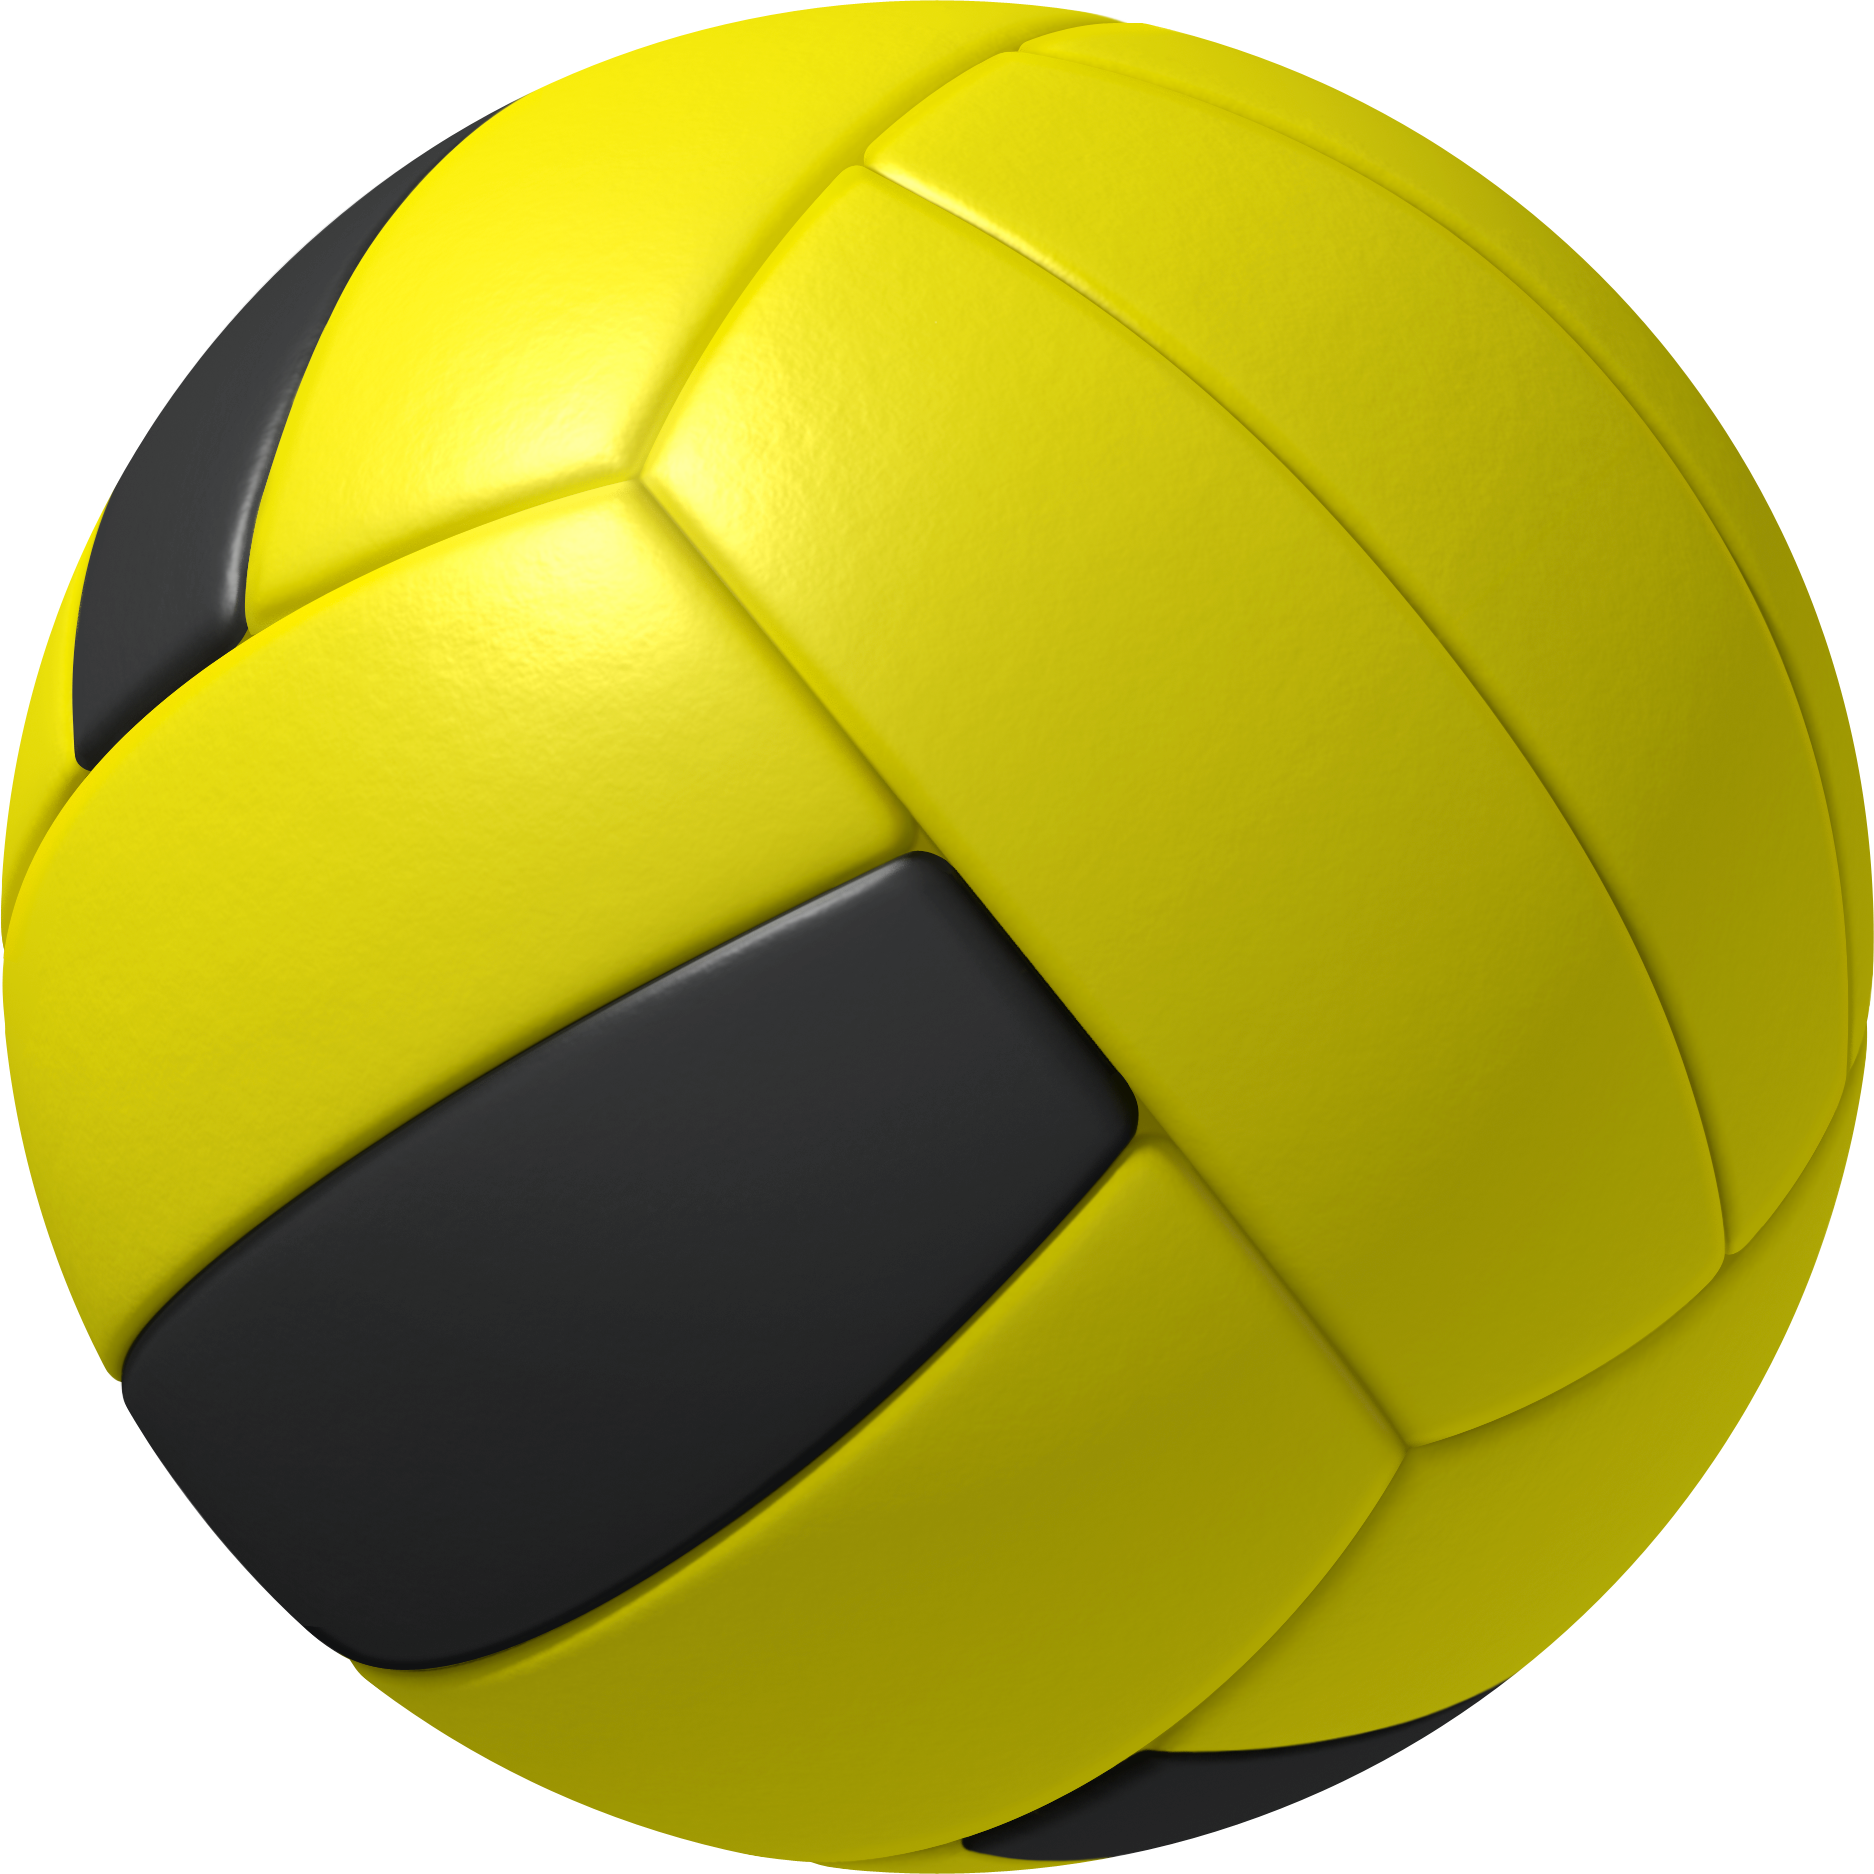 Volleyball Png Pic - Volleybal, Transparent background PNG HD thumbnail